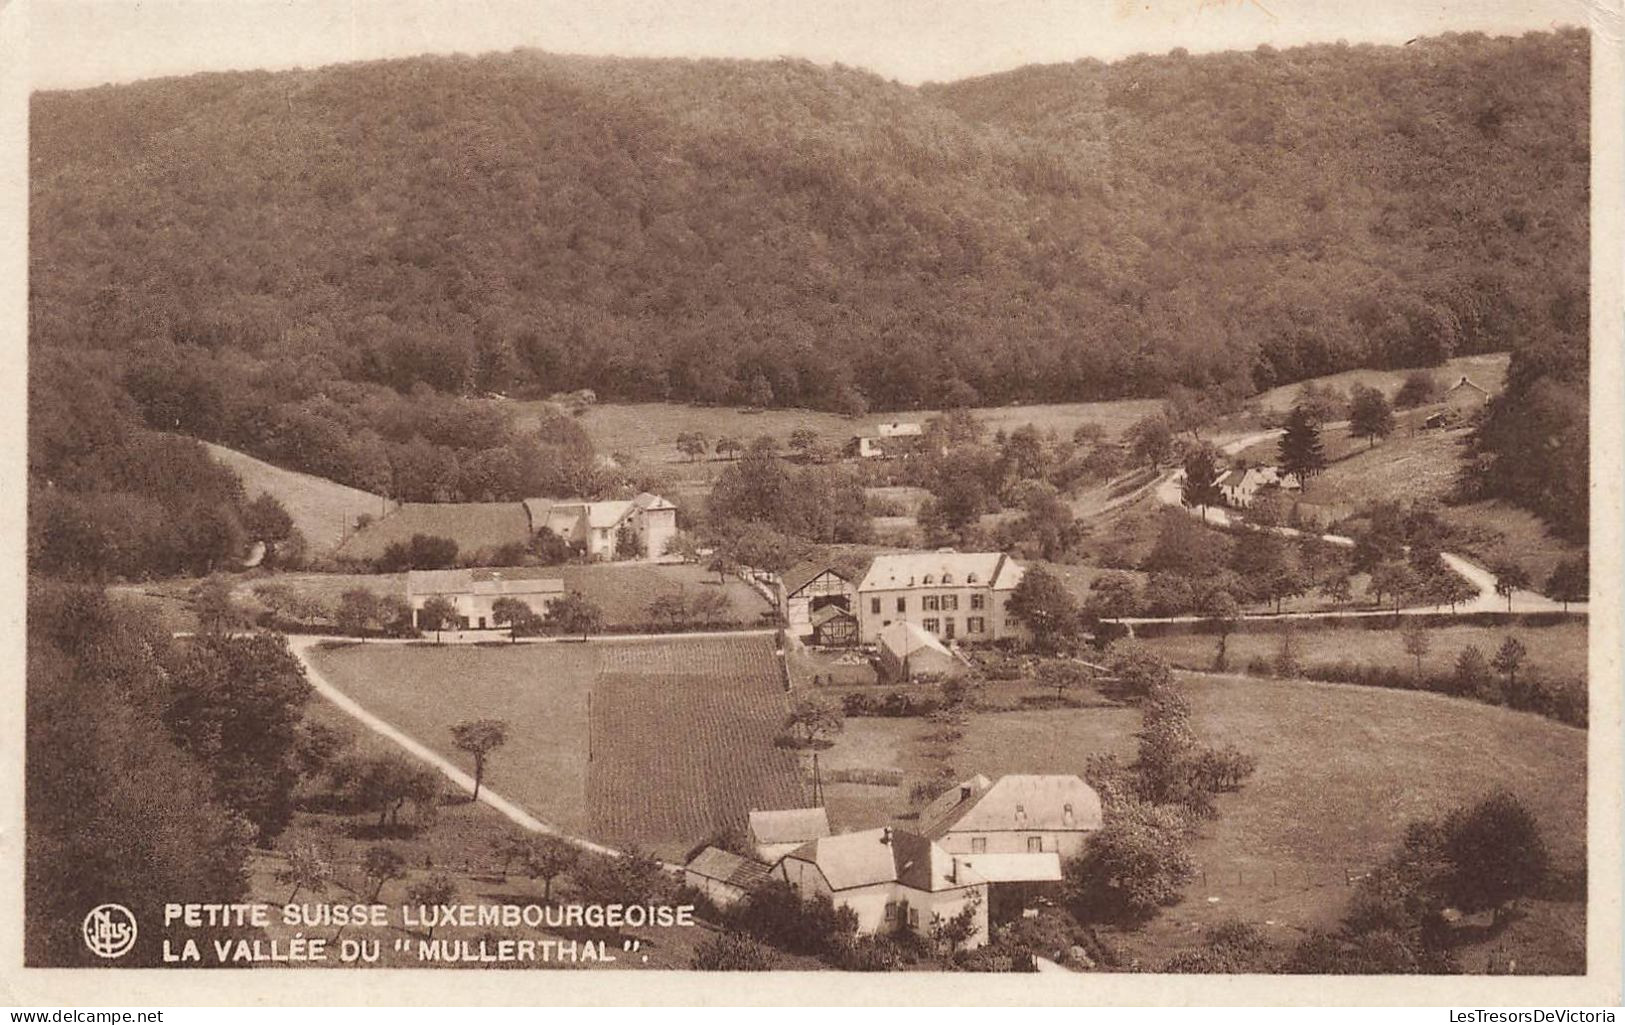 LUXEMBOURG - Muellerthal - Petite Suisse Luxembourgeoise - La Vallée Du "Mullerthal" - Carte Postale Ancienne - Müllerthal